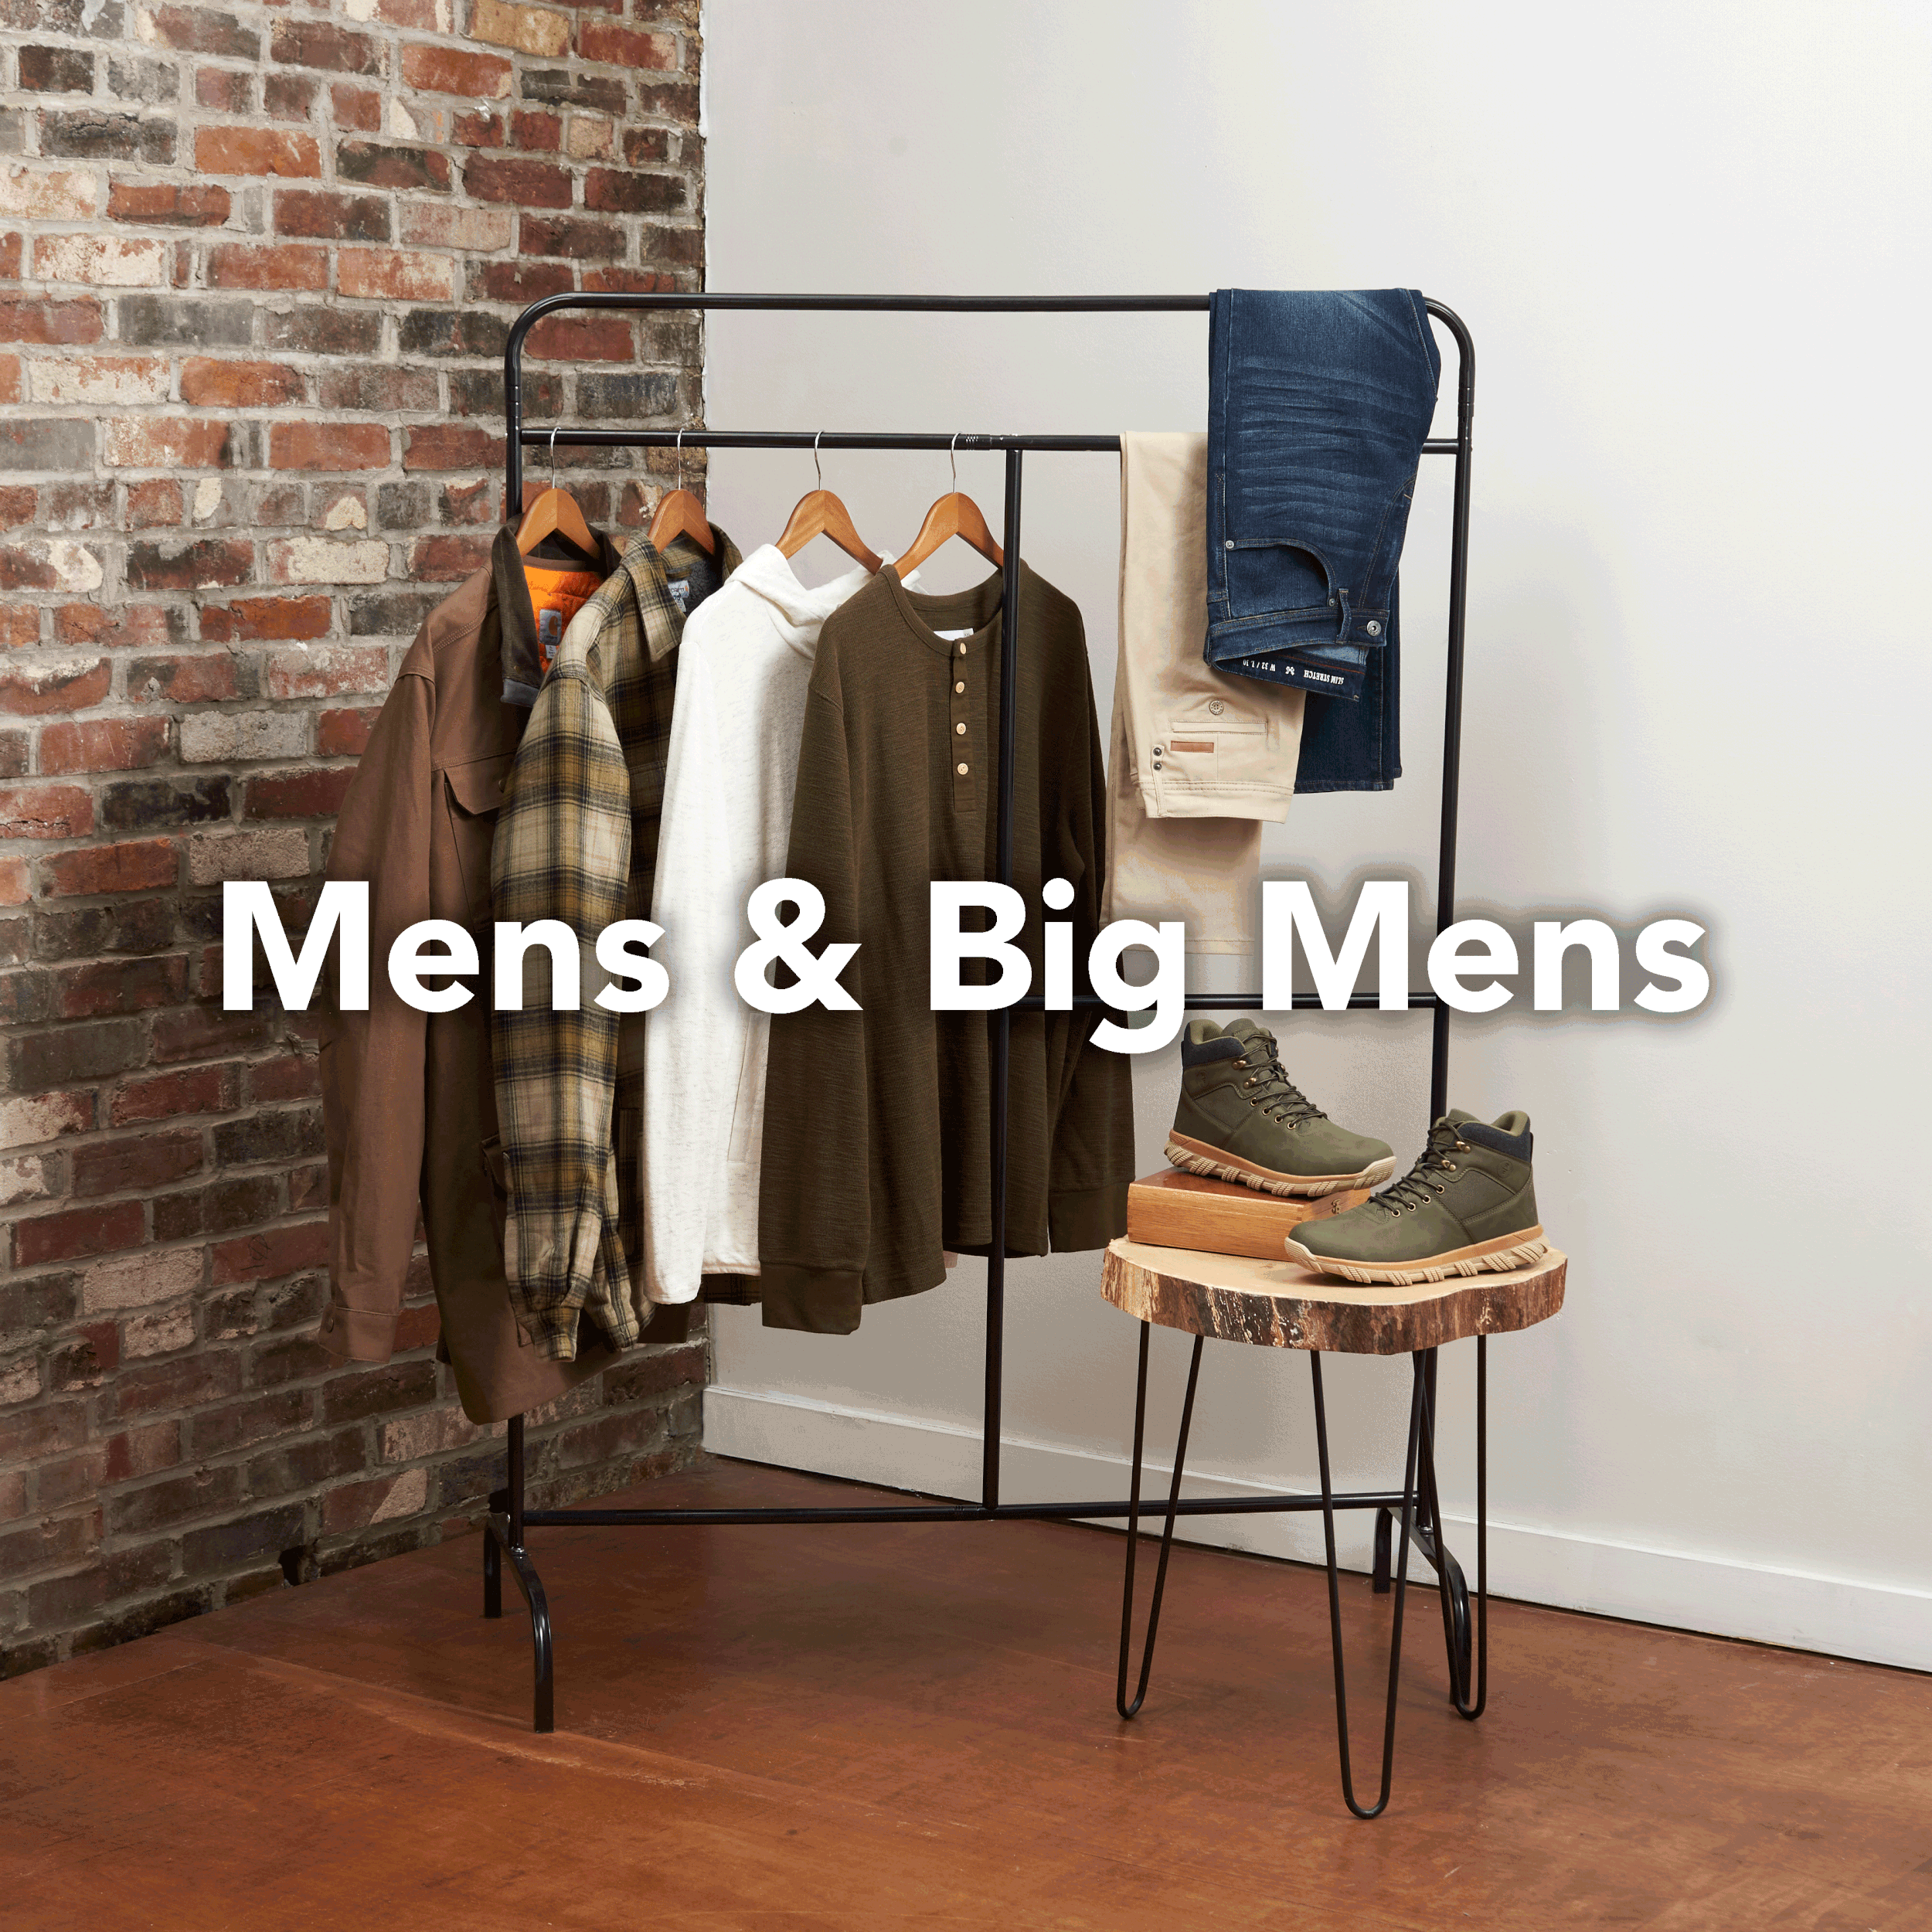 Men's Clothing & Accessories Near You: Apparel, Outfits, Fashion, Men's Wear  - Gabe's — Gabe's